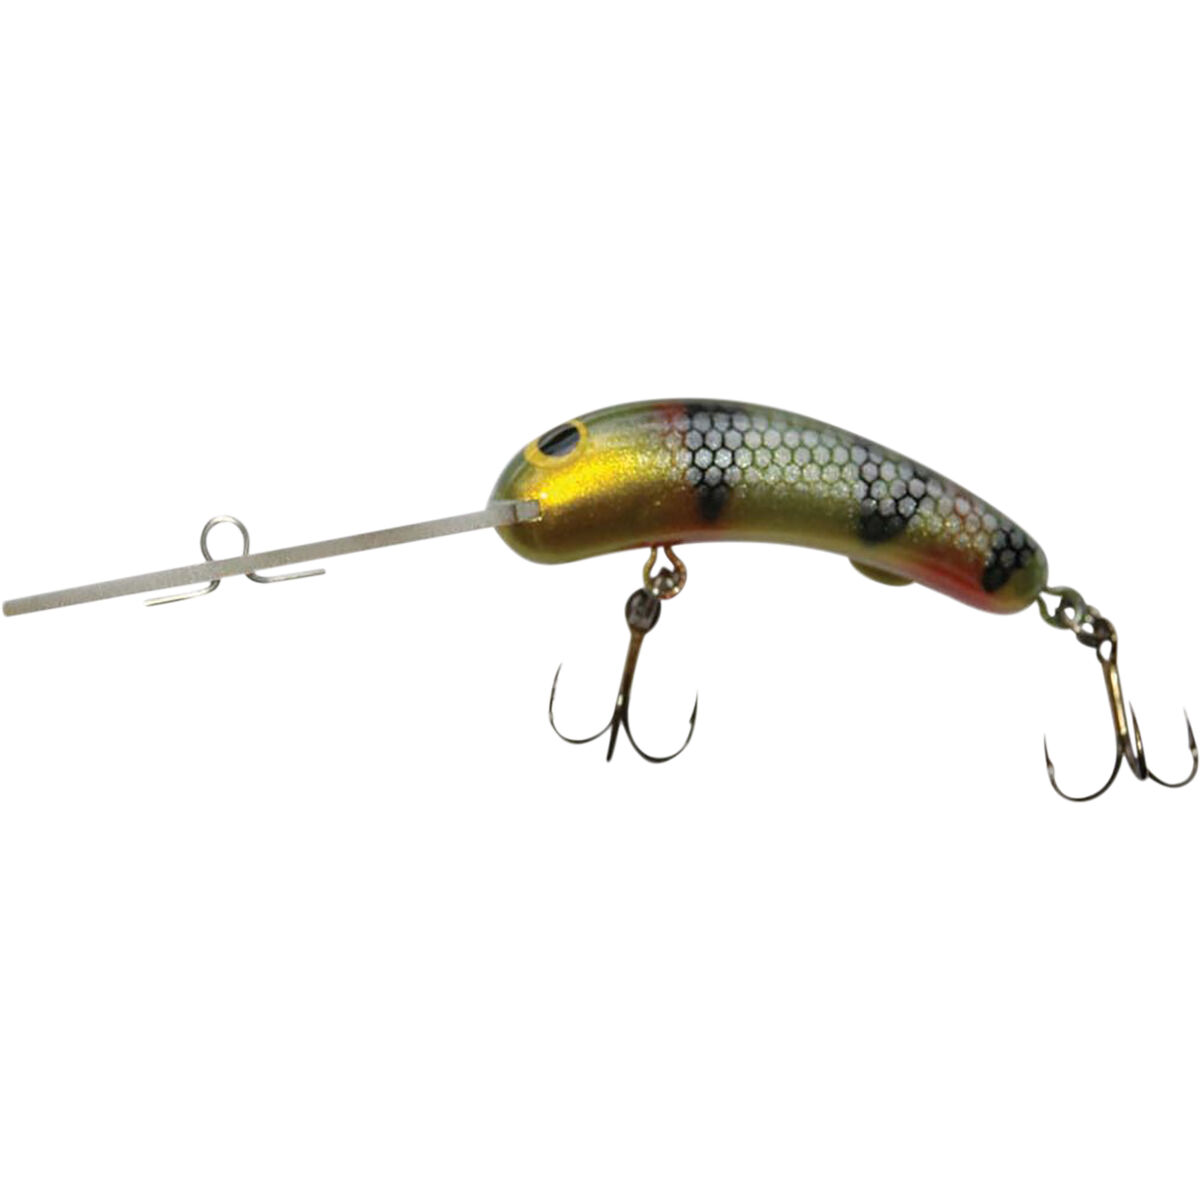 Australian Crafted Lures Slim Invader Hard Body Lure 50mm Colour